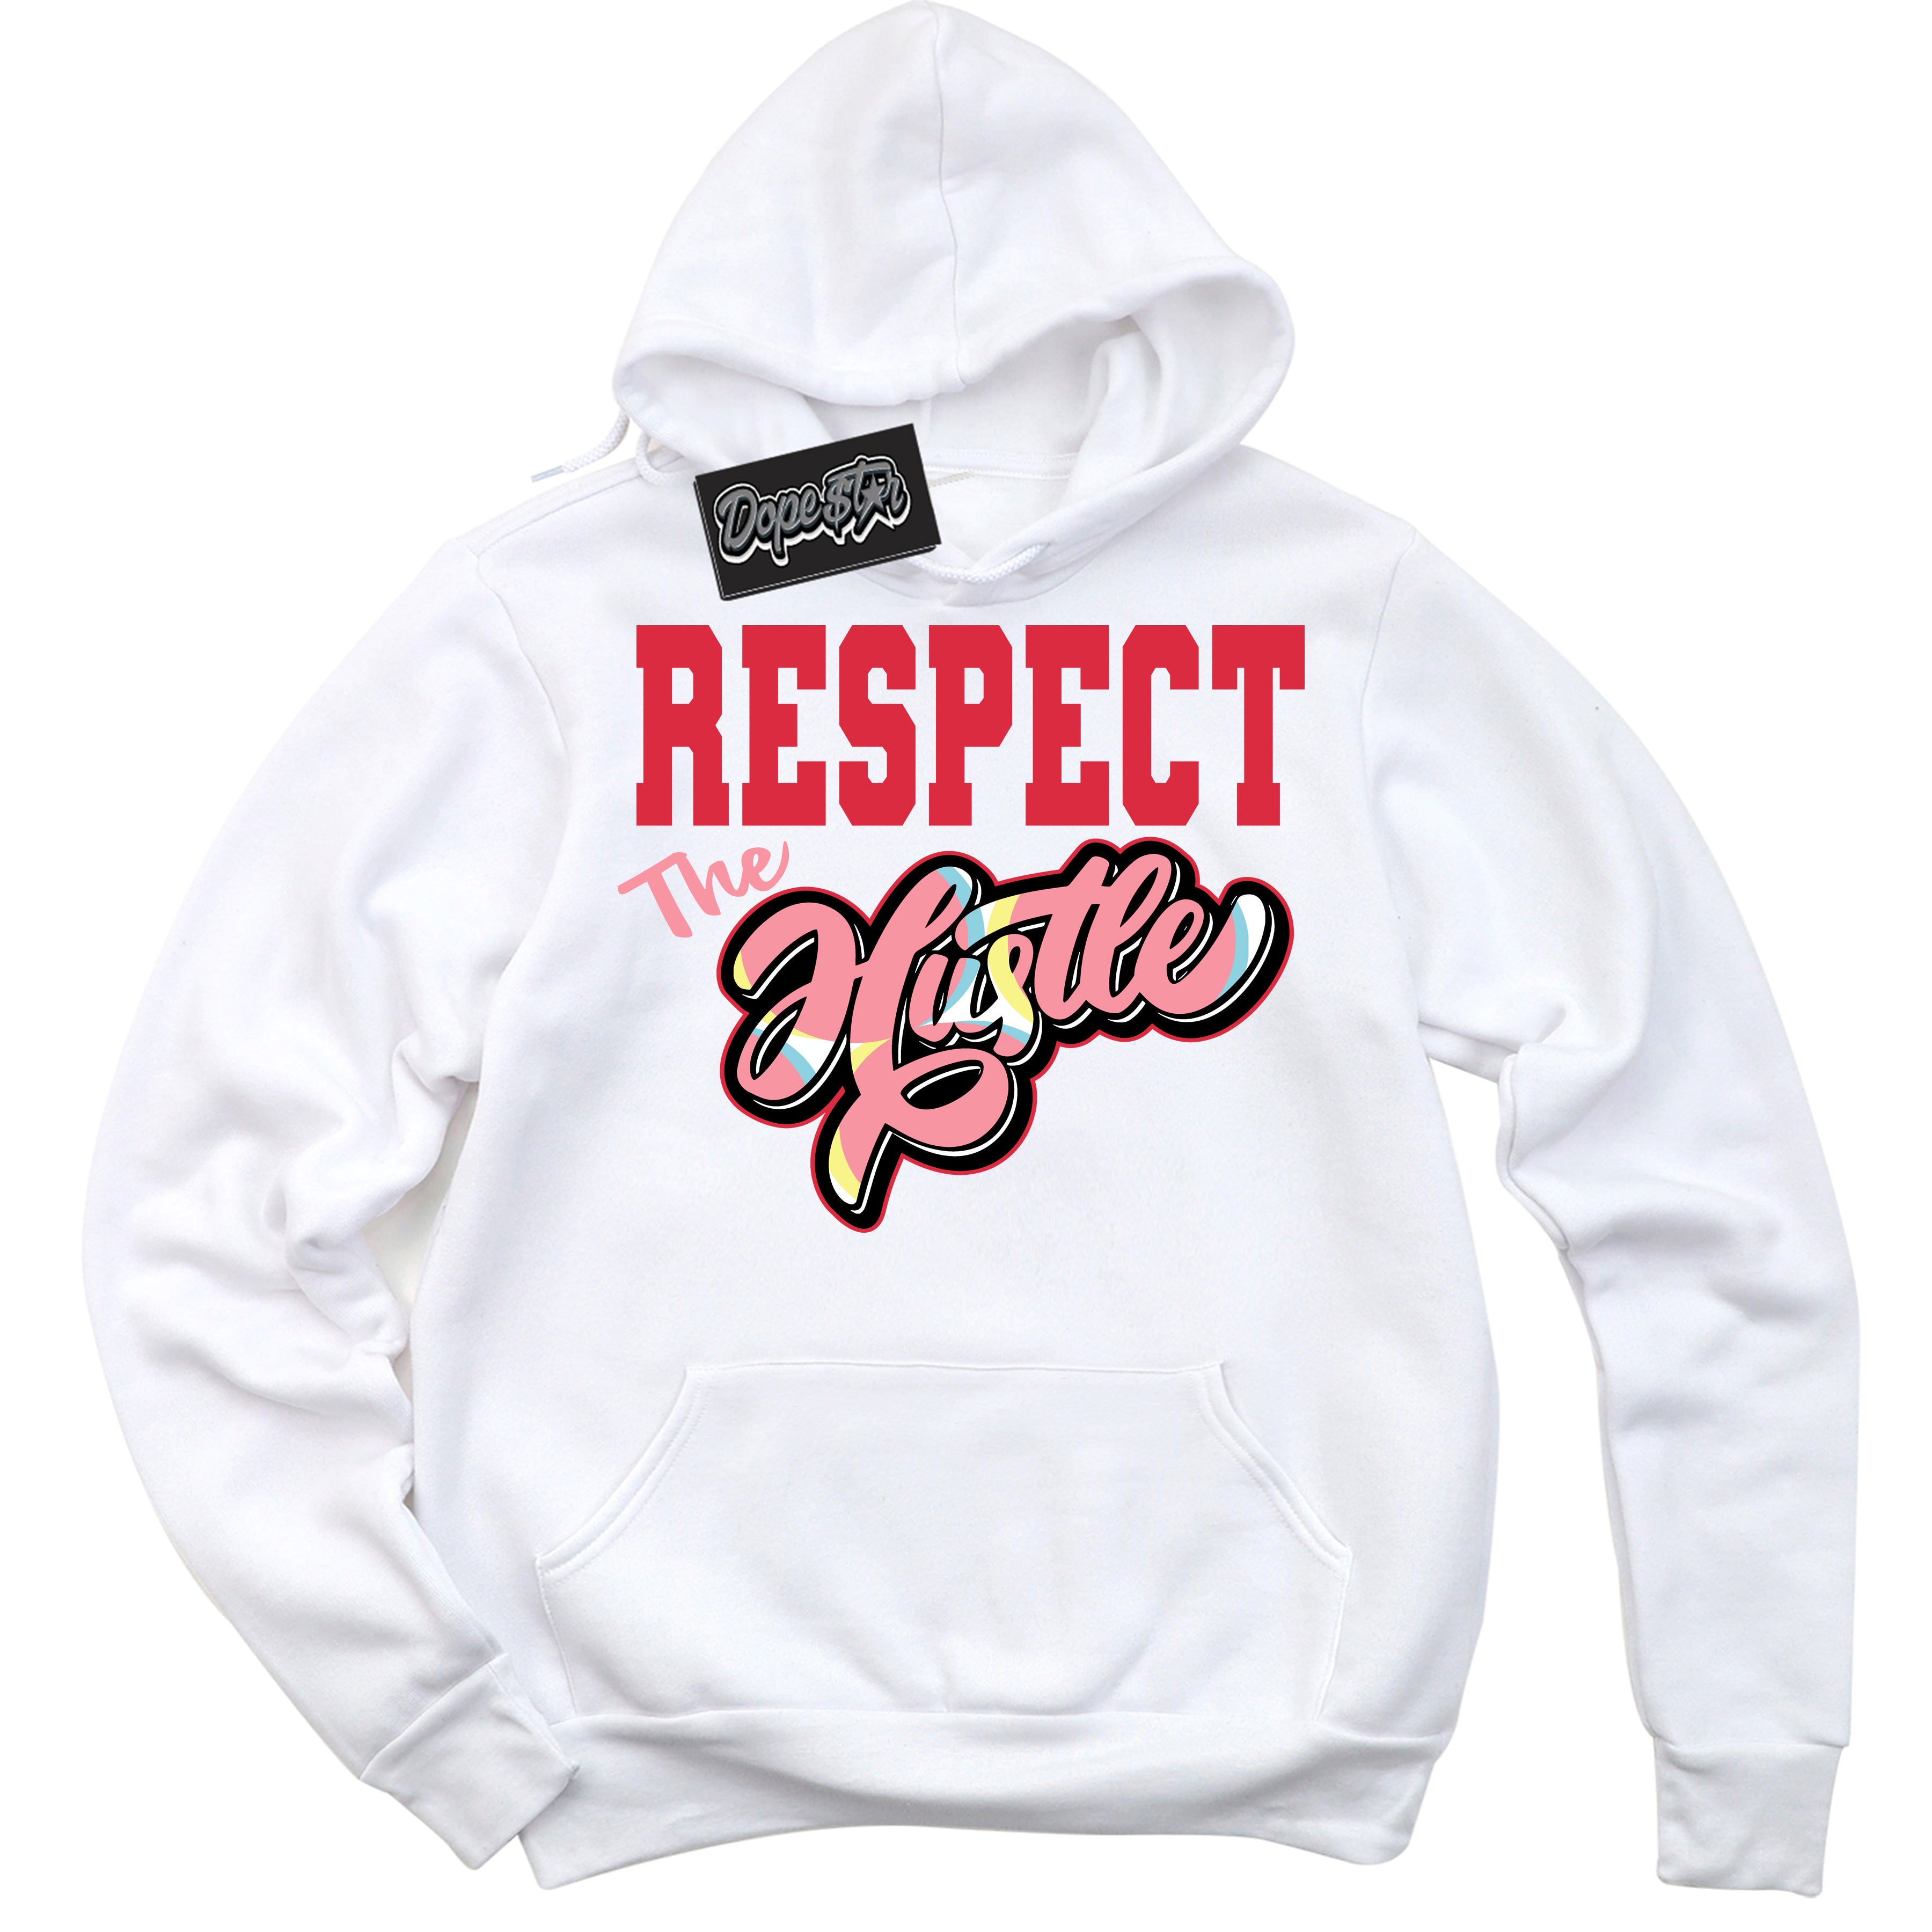 Cool White Graphic DopeStar Hoodie with “ Respect The Hustle “ print, that perfectly matches Spider-Verse 1s sneakers